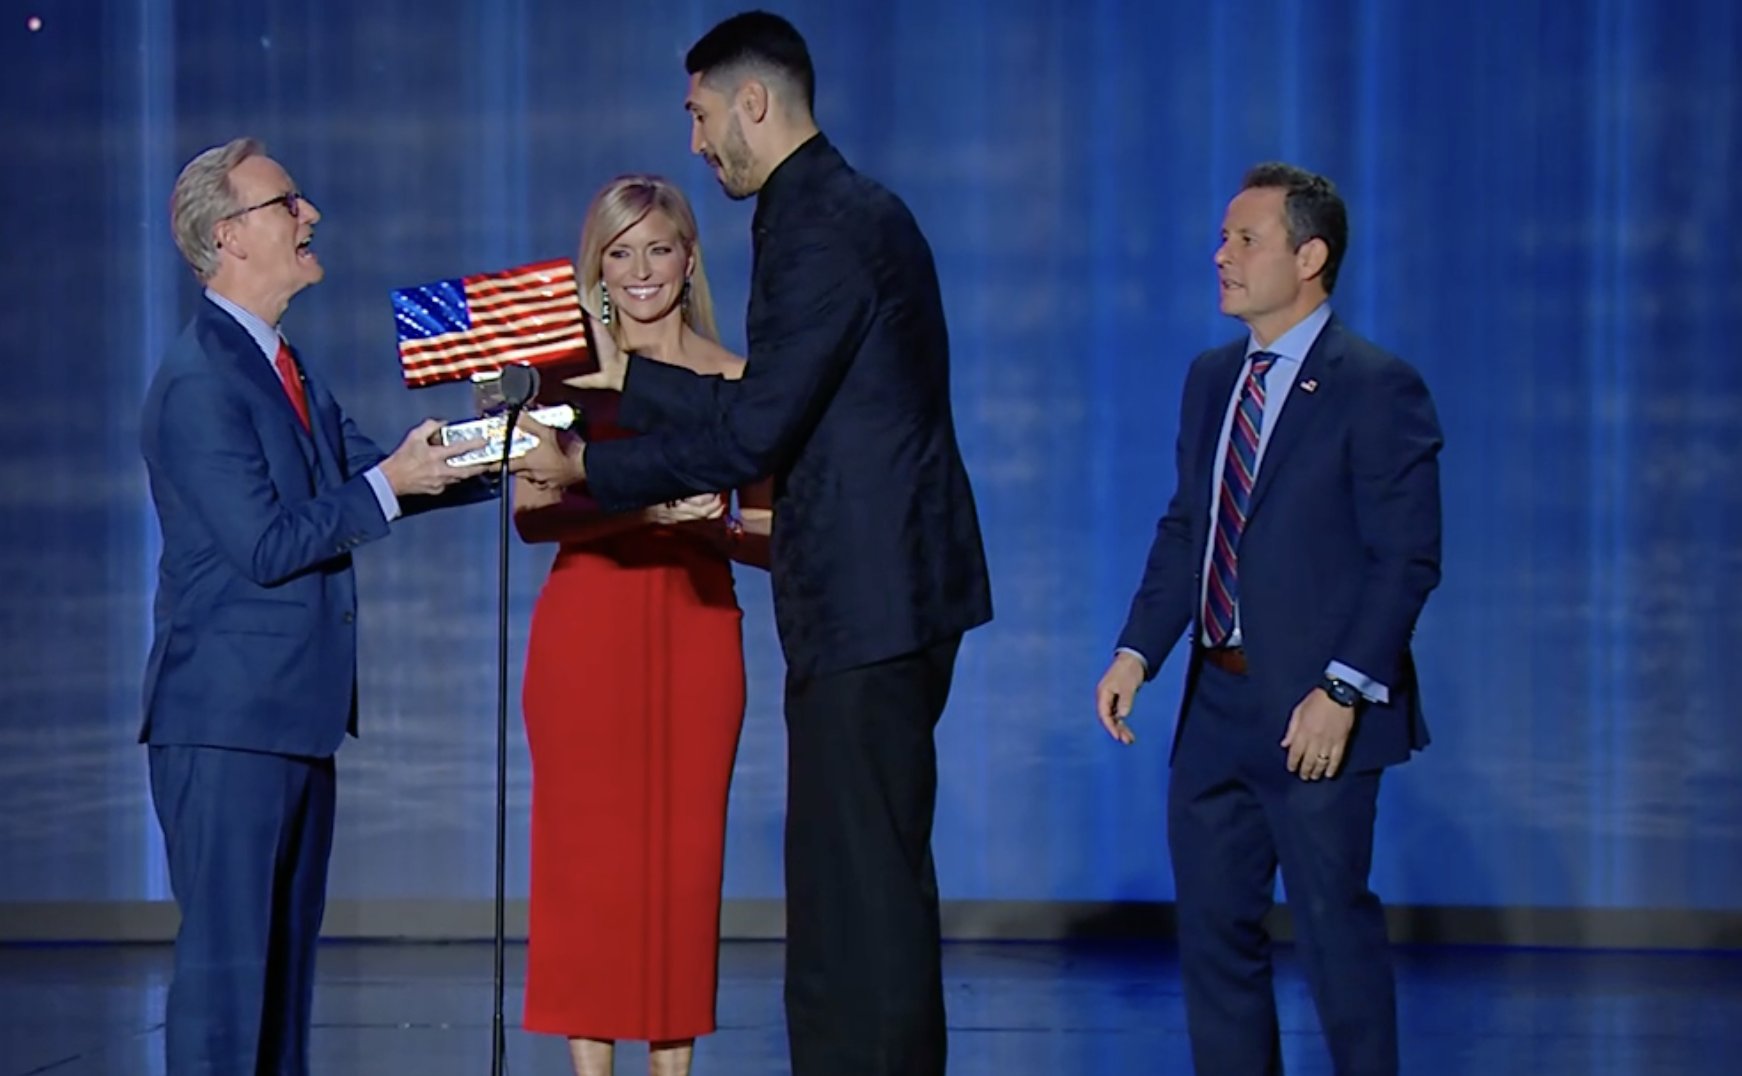 Enes Kanter Freedom accepts a large, heavy American flag trophy from Steve Doocy, Ainsley Earhardt, and Brian Kilmeade